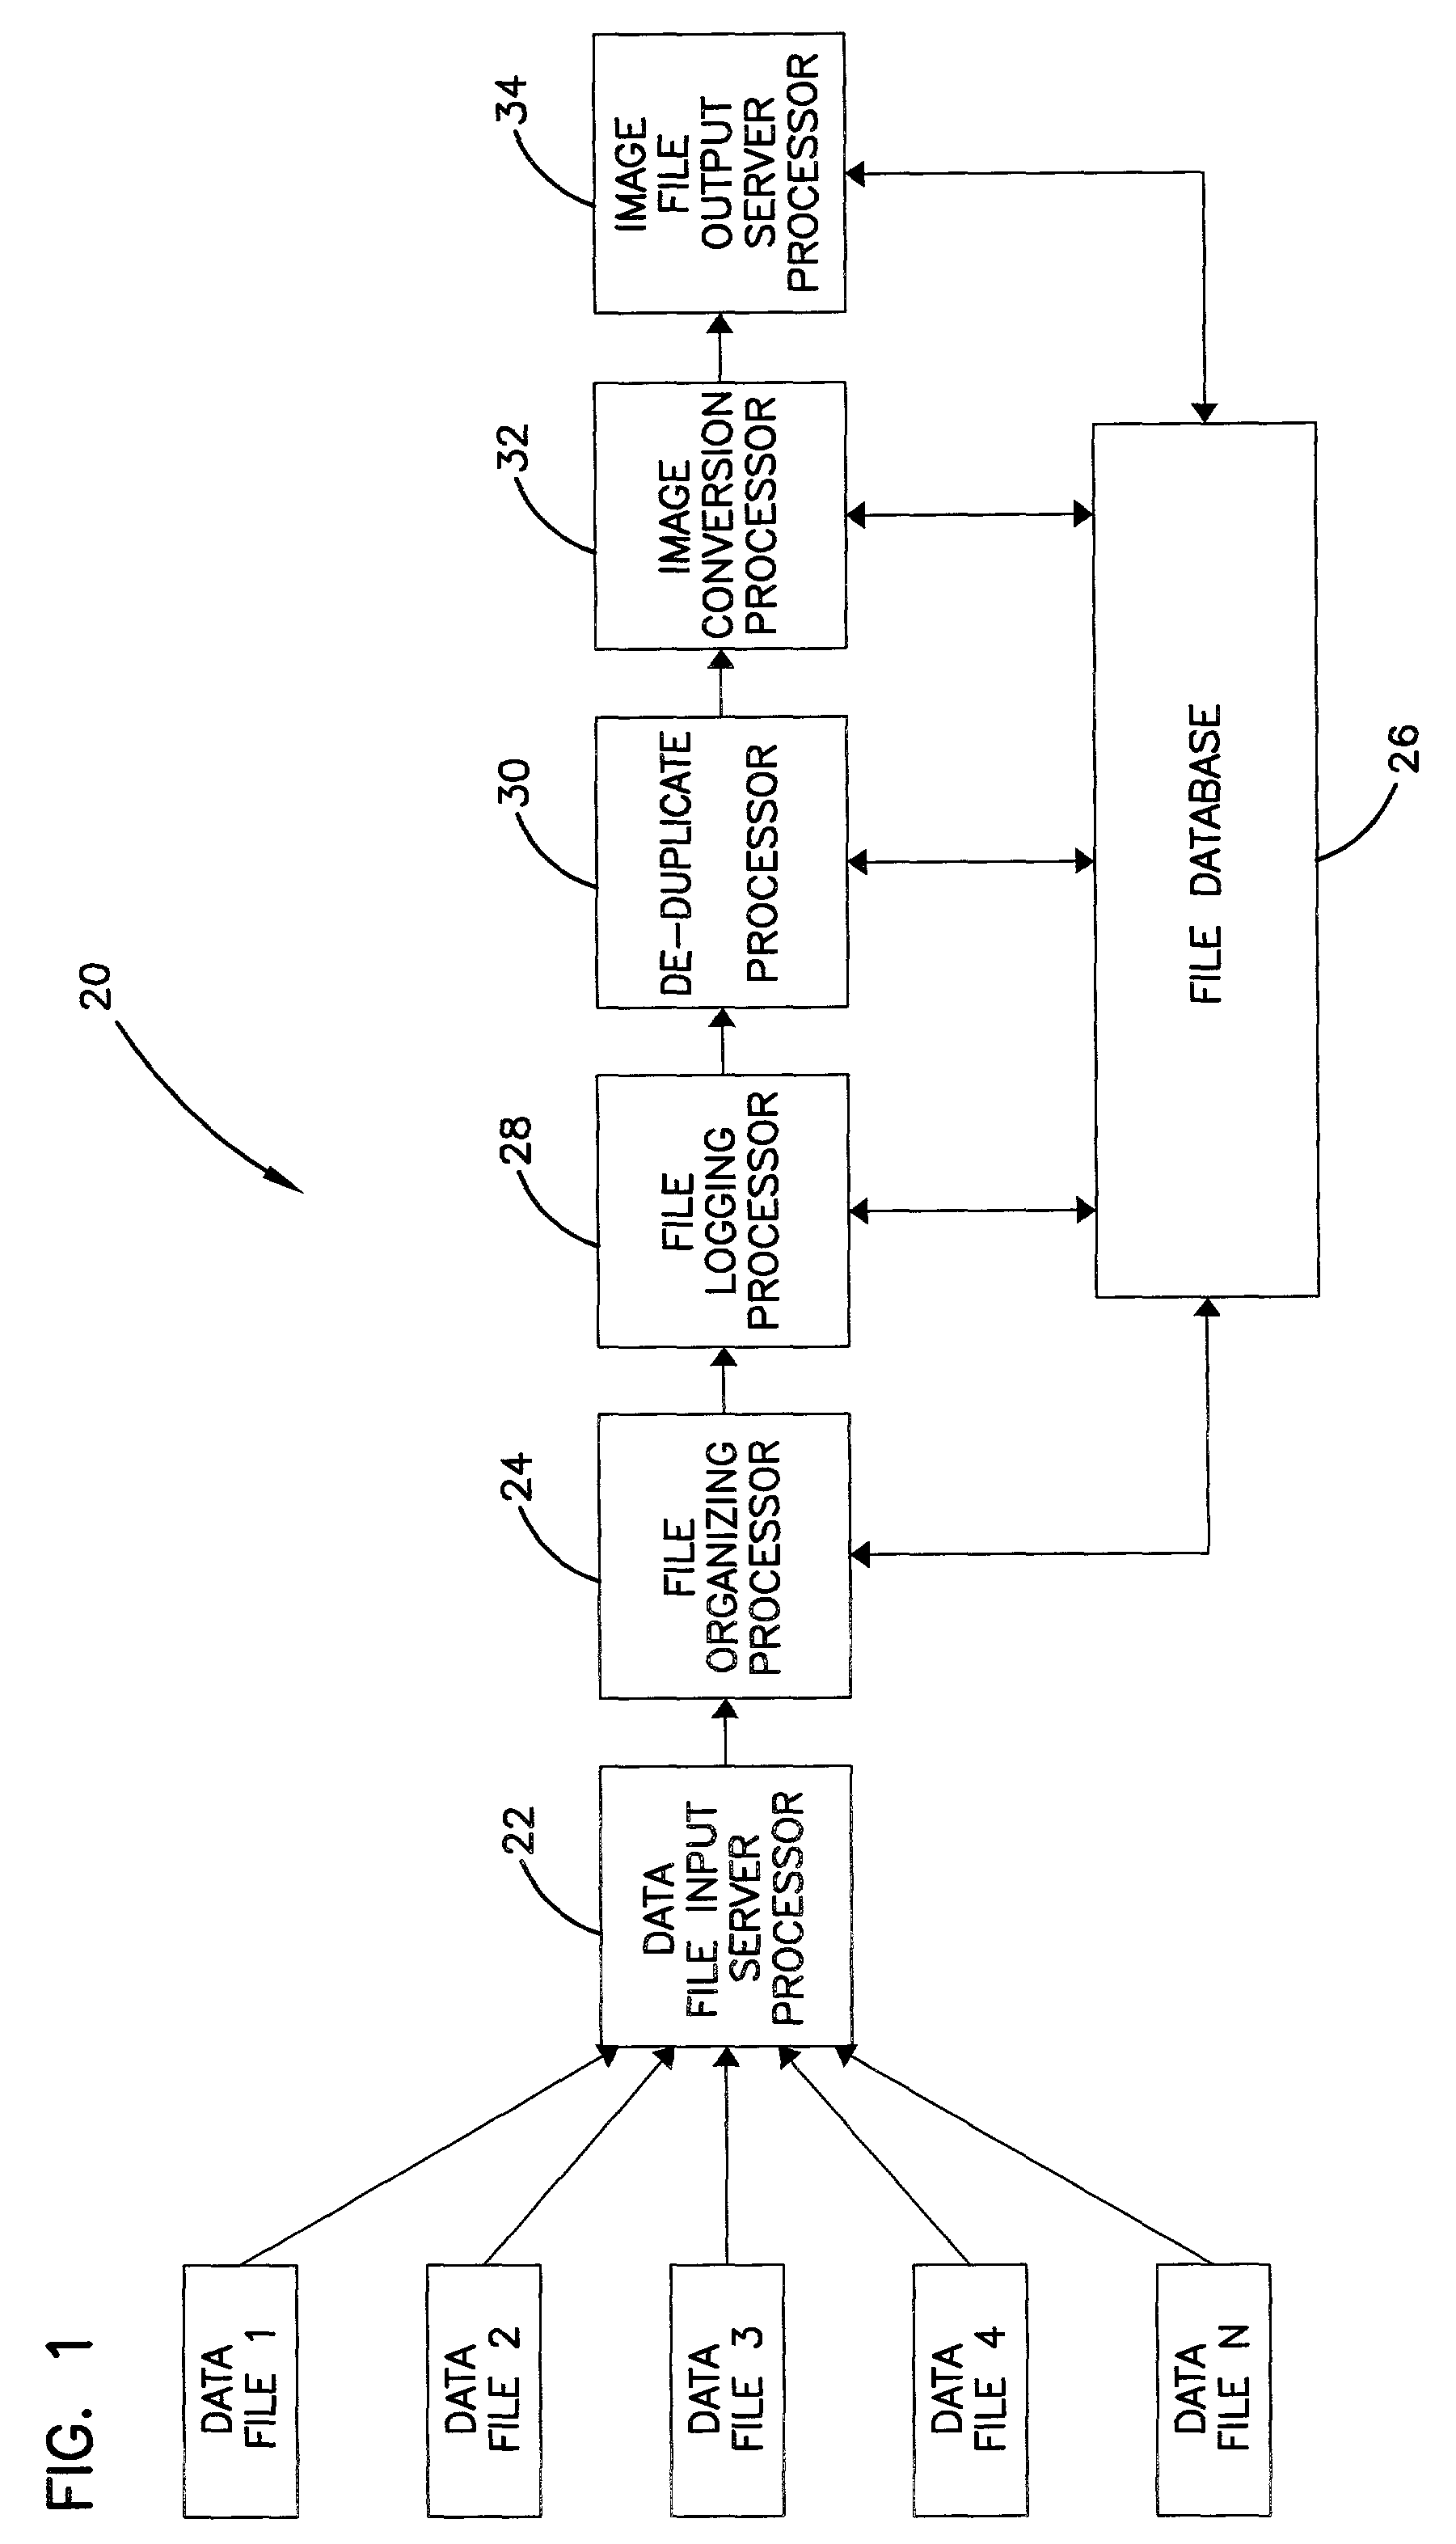 System and method for data management